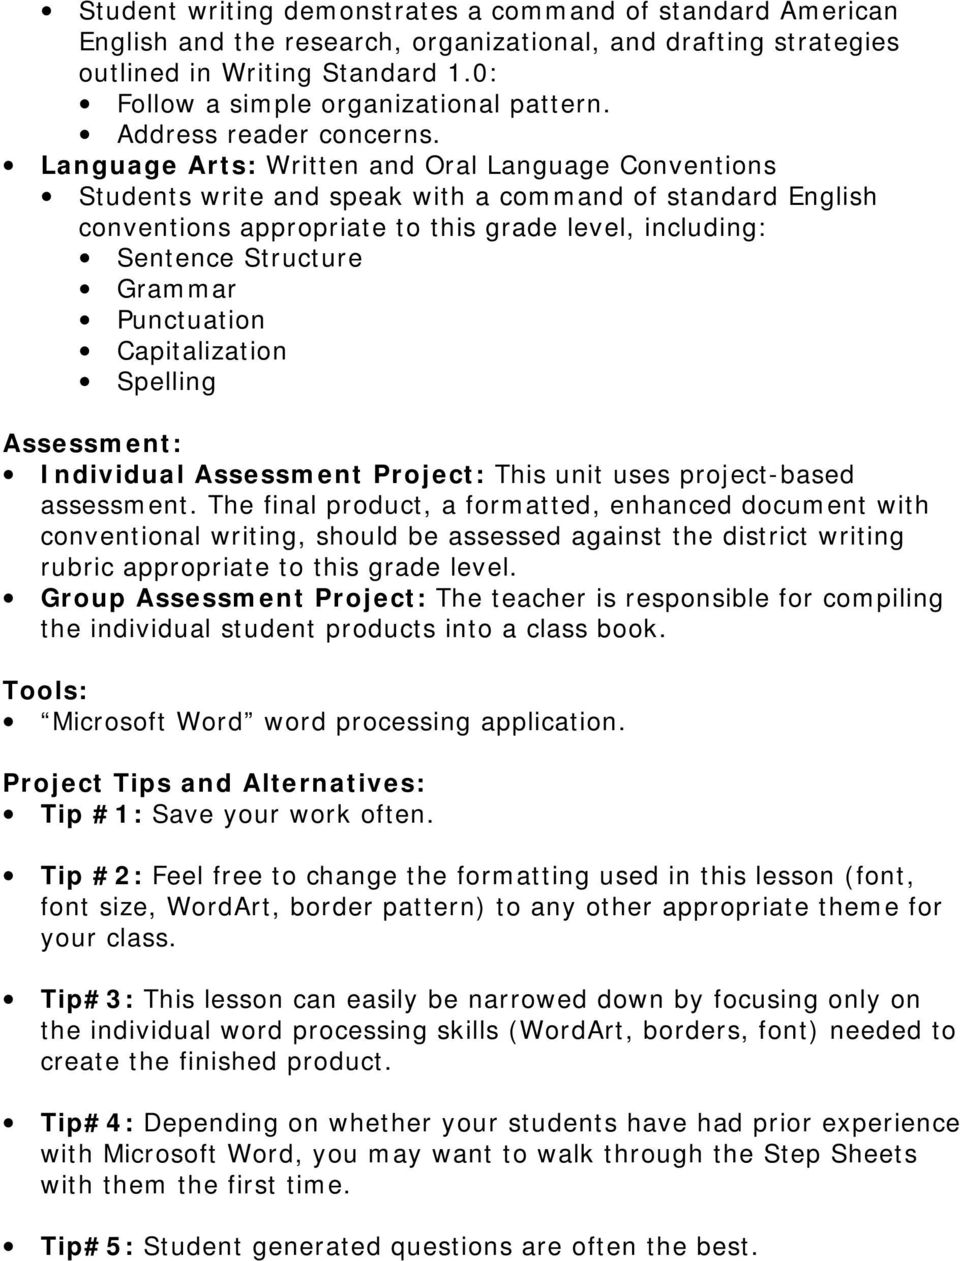 Language Arts: Written and Oral Language Conventions Students write and speak with a command of standard English conventions appropriate to this grade level, including: Sentence Structure Grammar